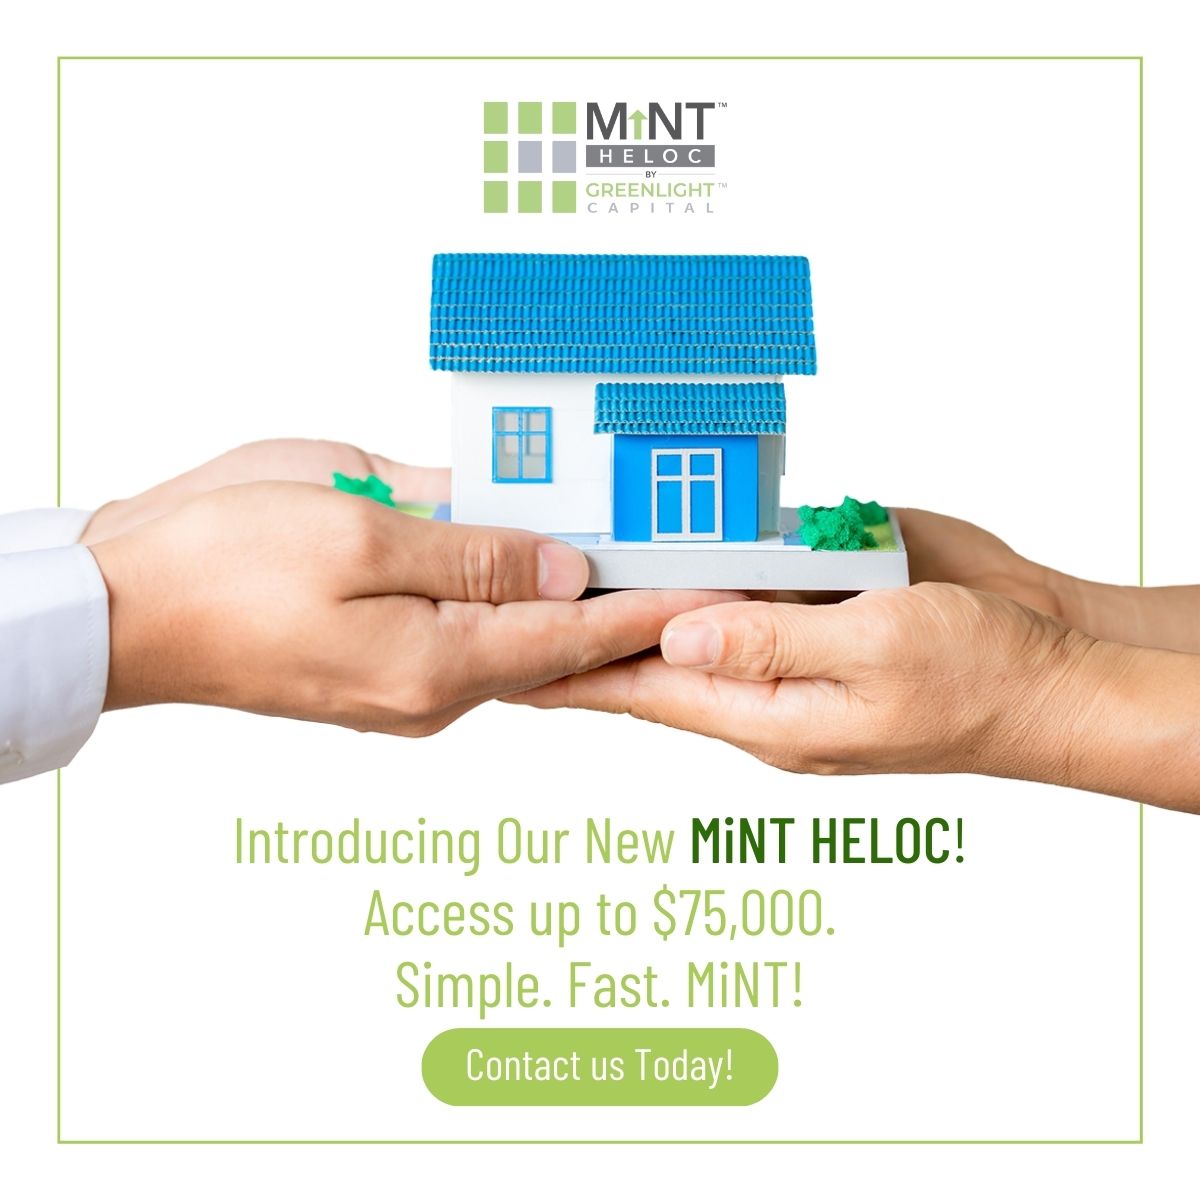 Introducing our new Mint HELOC! 💰 Access up to $75,000 in home equity today. Call us to learn more and start leveraging your home's value for your financial needs. #HELOC 

#HomeEquity #FinancialFlexibility #RealEstateFinance #Gogreenlightloans #privatelender #greenlightcapital